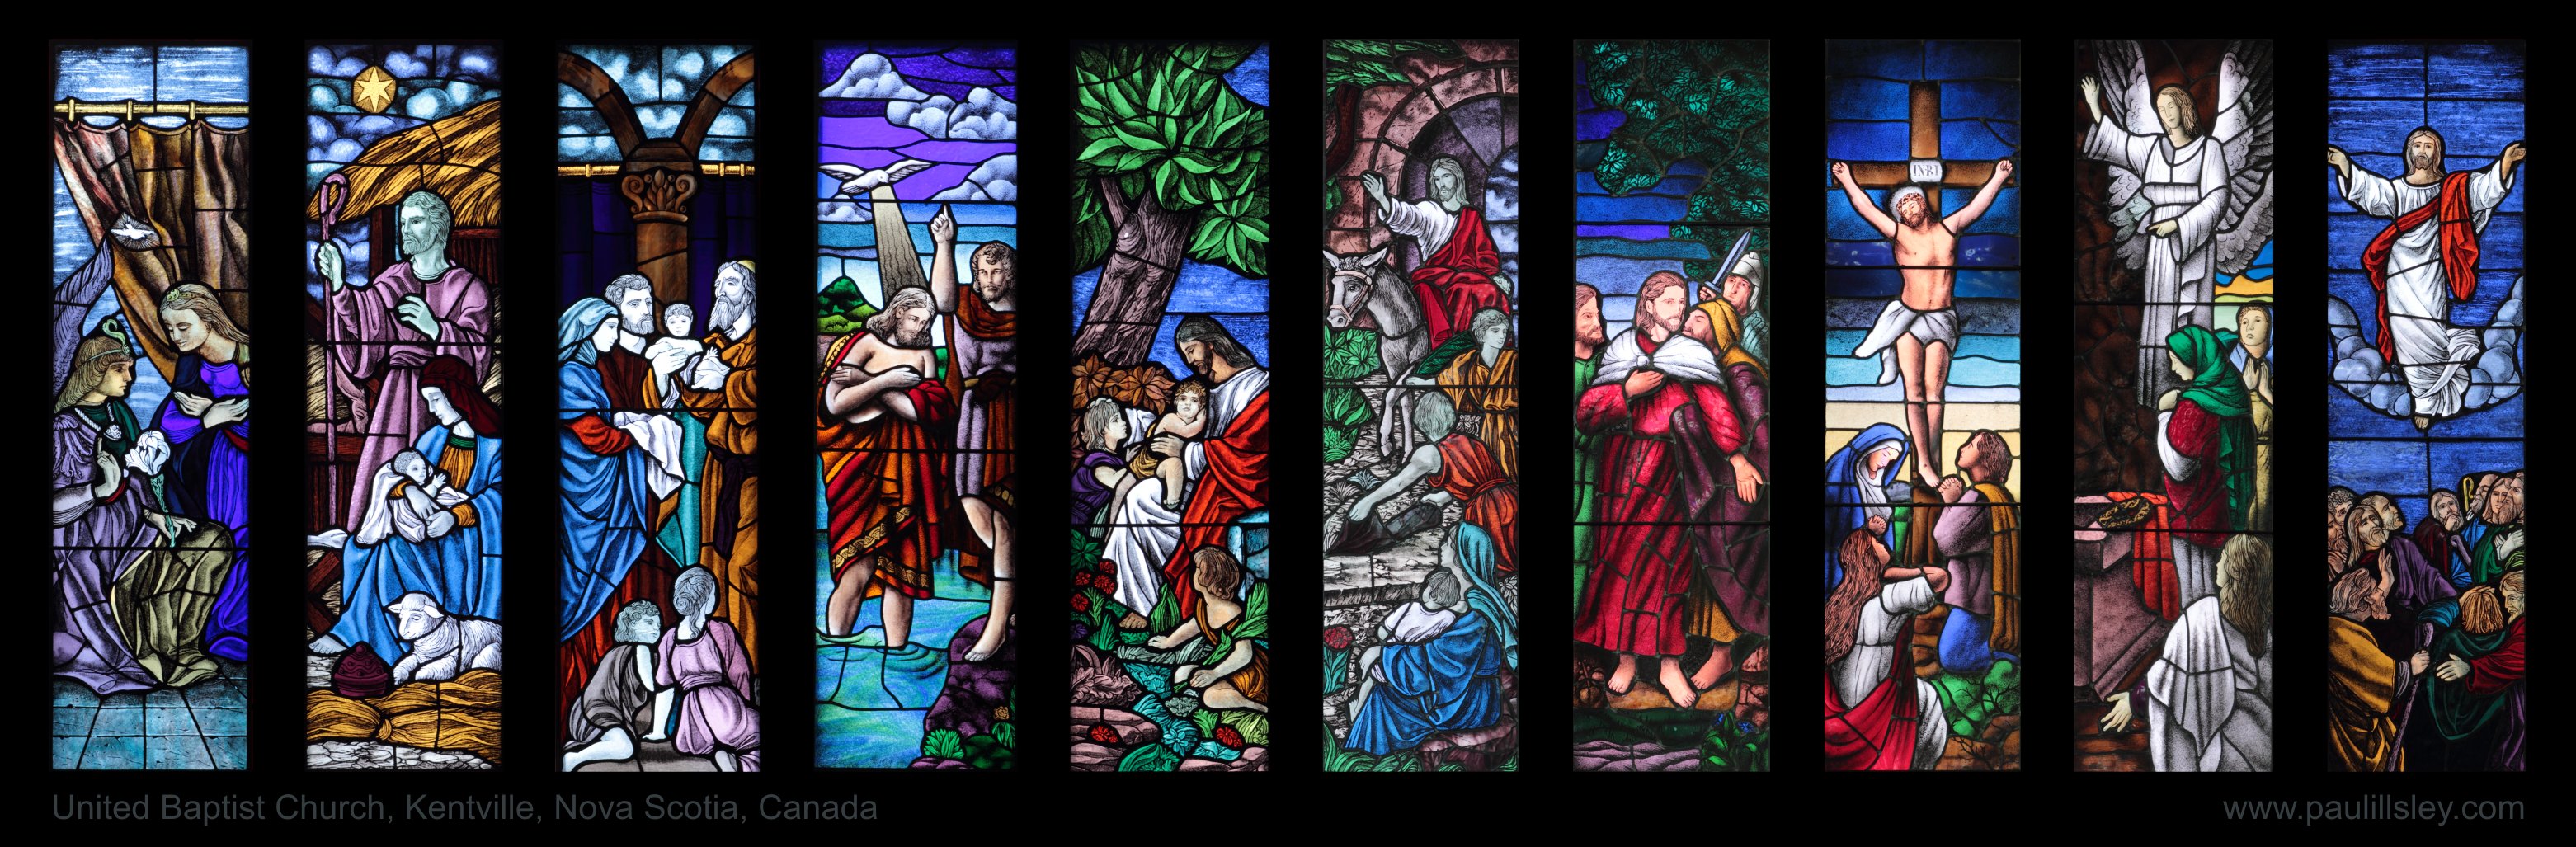 Stained Glass Art Window Religion R Wallpaper Background